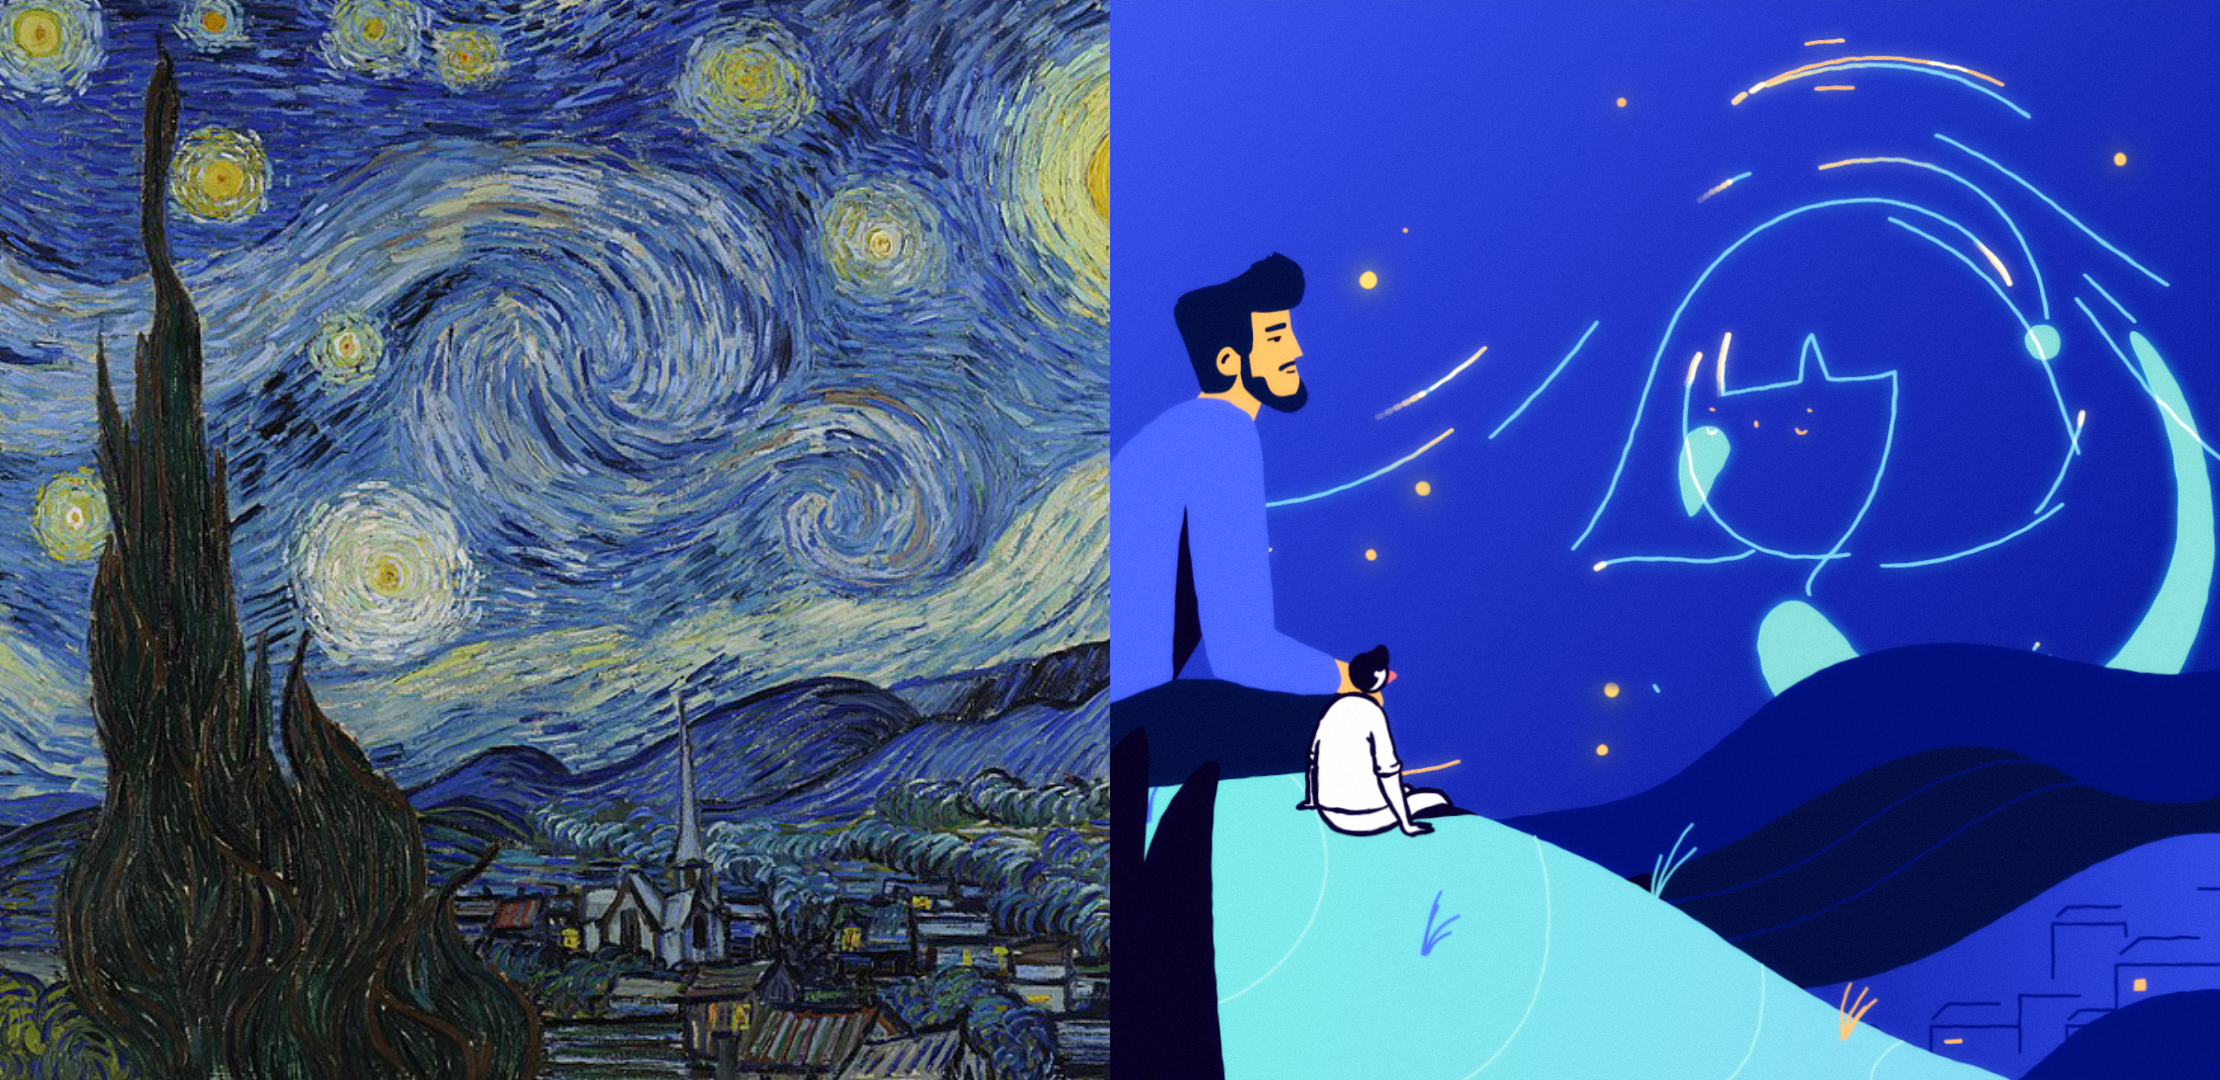 The Starry Night by Van Gogh original and illustration